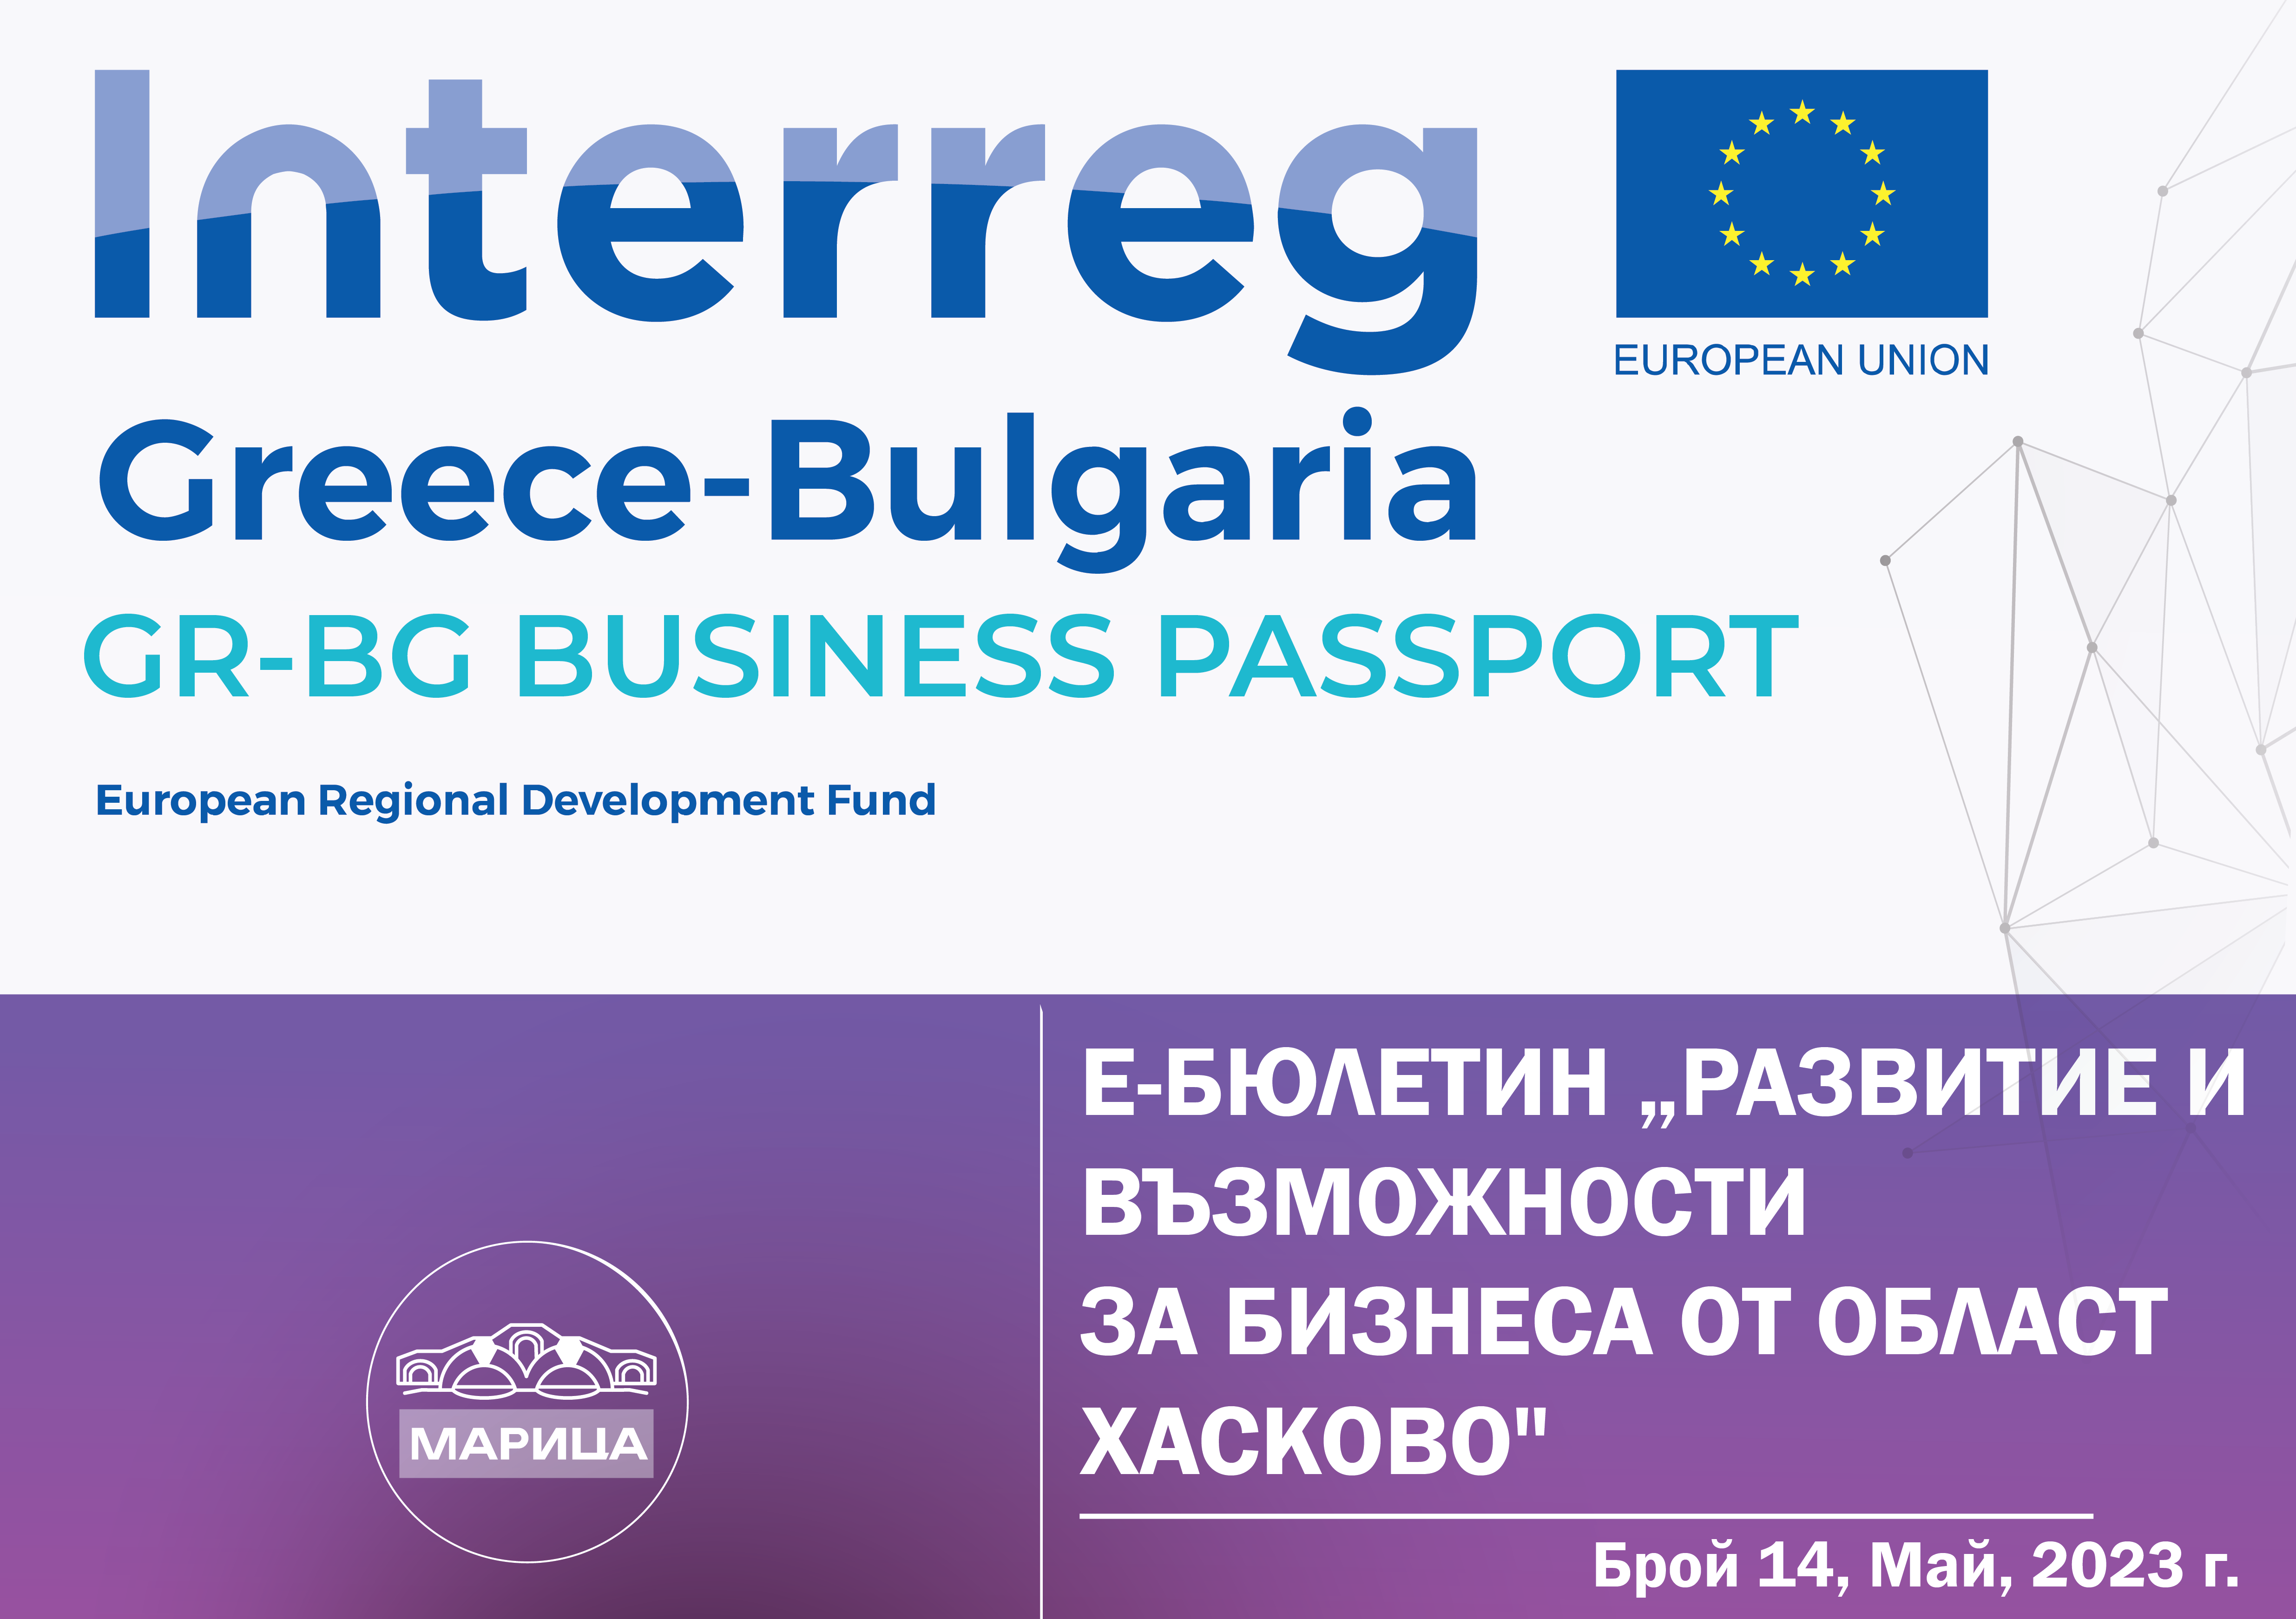 e-newsletter “Development and opportunities for business in the Haskovo region” under a project with the acronym “GR-BG BUSINESS PASSPORT, Маy, 2023, 14th edition